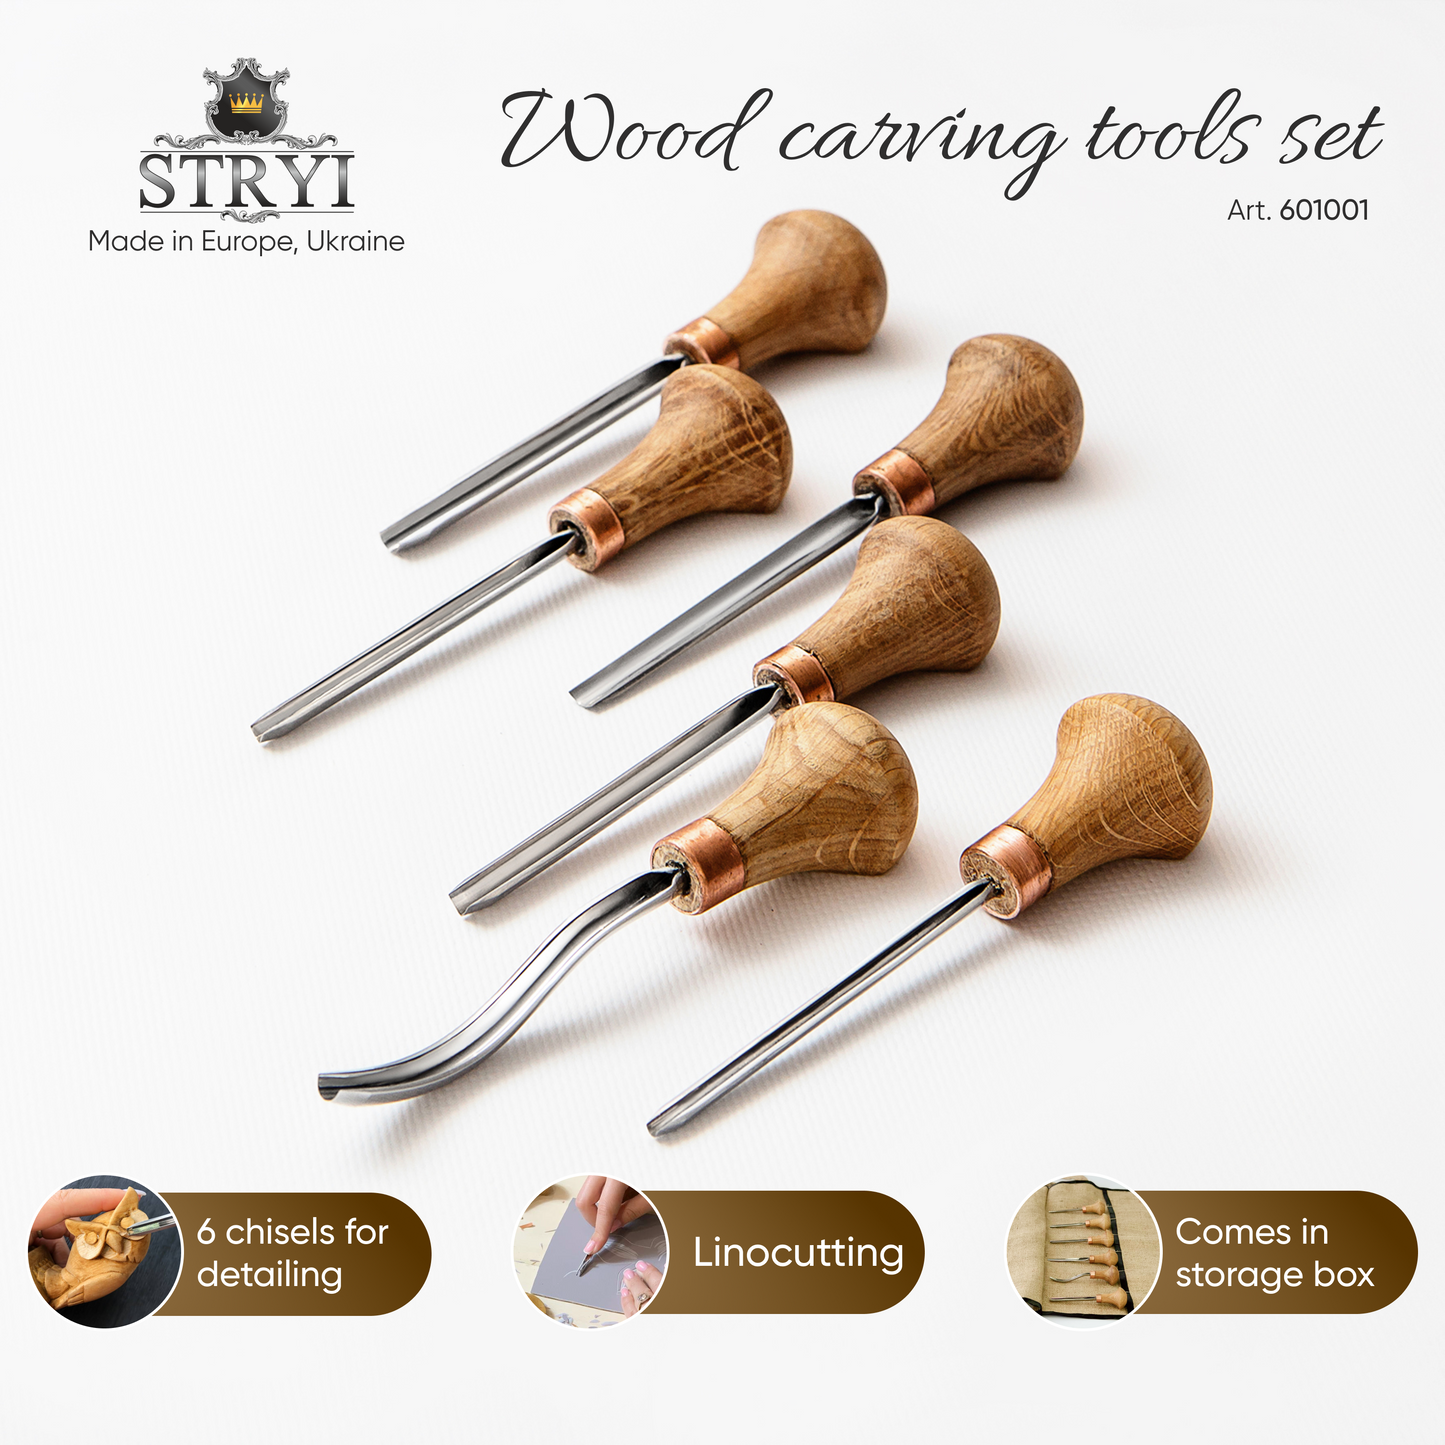 Palm carving tools set of 6 pcs, Gravers and Burins STRYI Start, Linocutting set